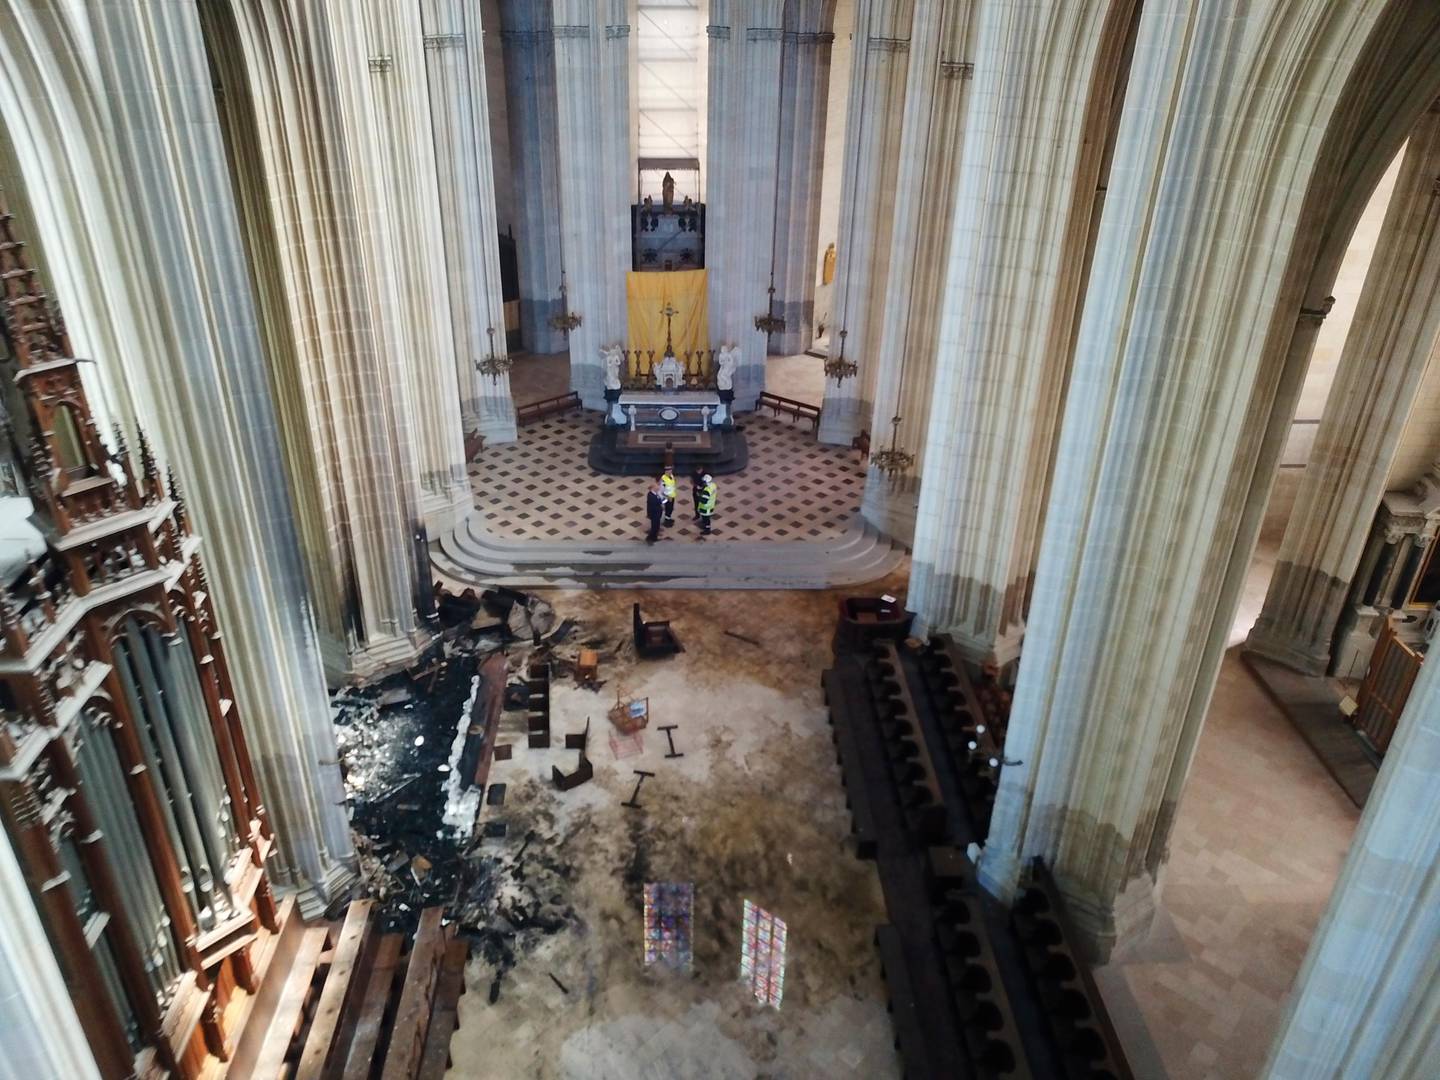 This image provided by SDIS 44 Department of Fire and Rescue, shows the inside of the Gothic St. Peter and St. Paul Cathedral after the blaze in Nantes, western France, Saturday, July 18, 2020. French officials launched an arson inquiry Saturday after the fire broke out destroying the organ, shattered stained glass windows and sent black smoke spewing from between the cathedral towers. (SDIS 44 Department of Fire and Rescue via AP)